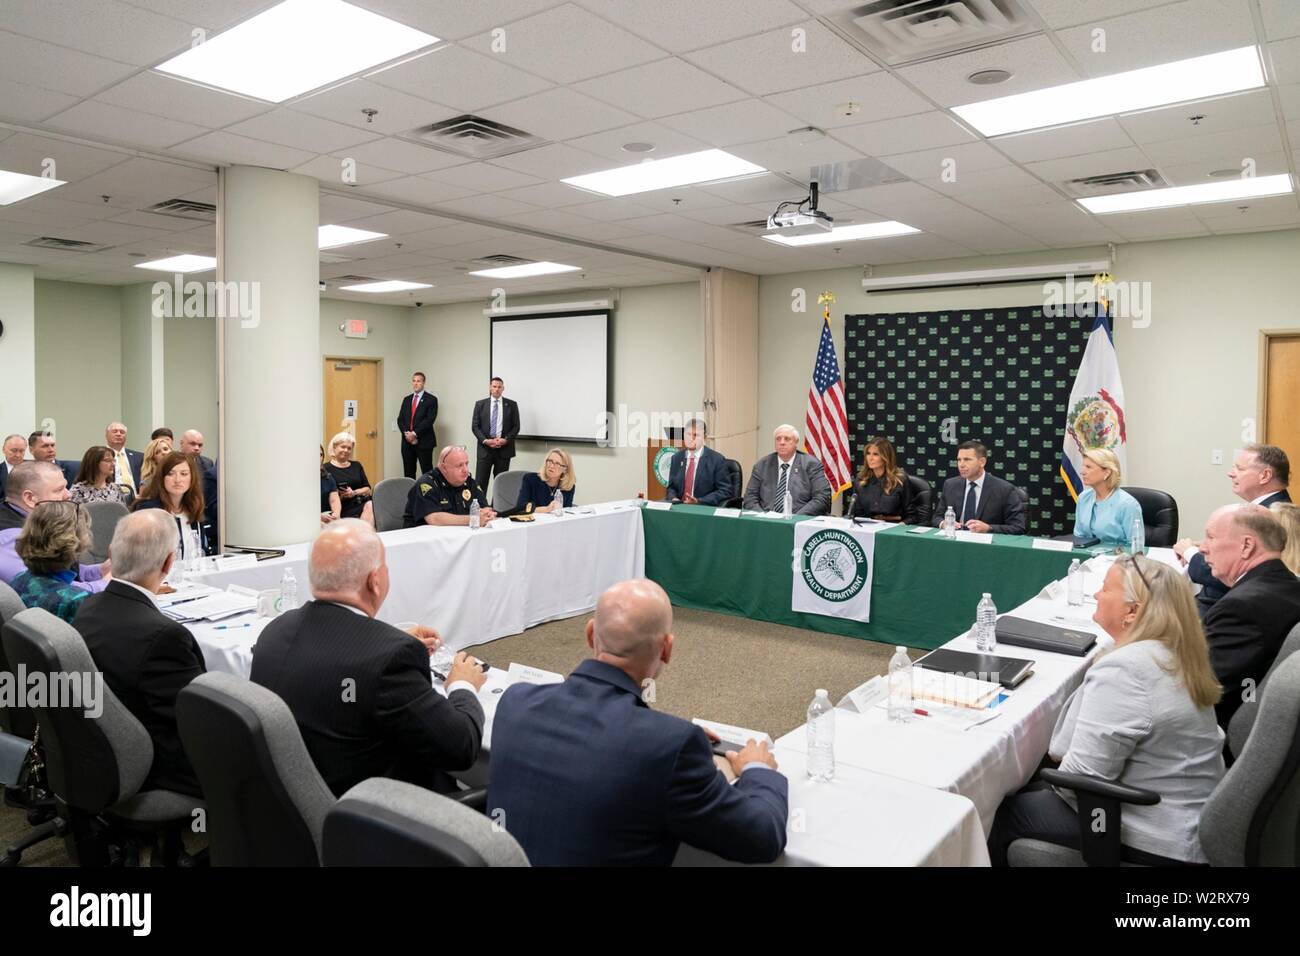 U.S First Lady Melania Trump participates in an opioid crisis roundtable discussion with state and local community leaders at the Cabell-Huntington Health Department July 8, 2019 in Huntington, West Virginia. Stock Photo